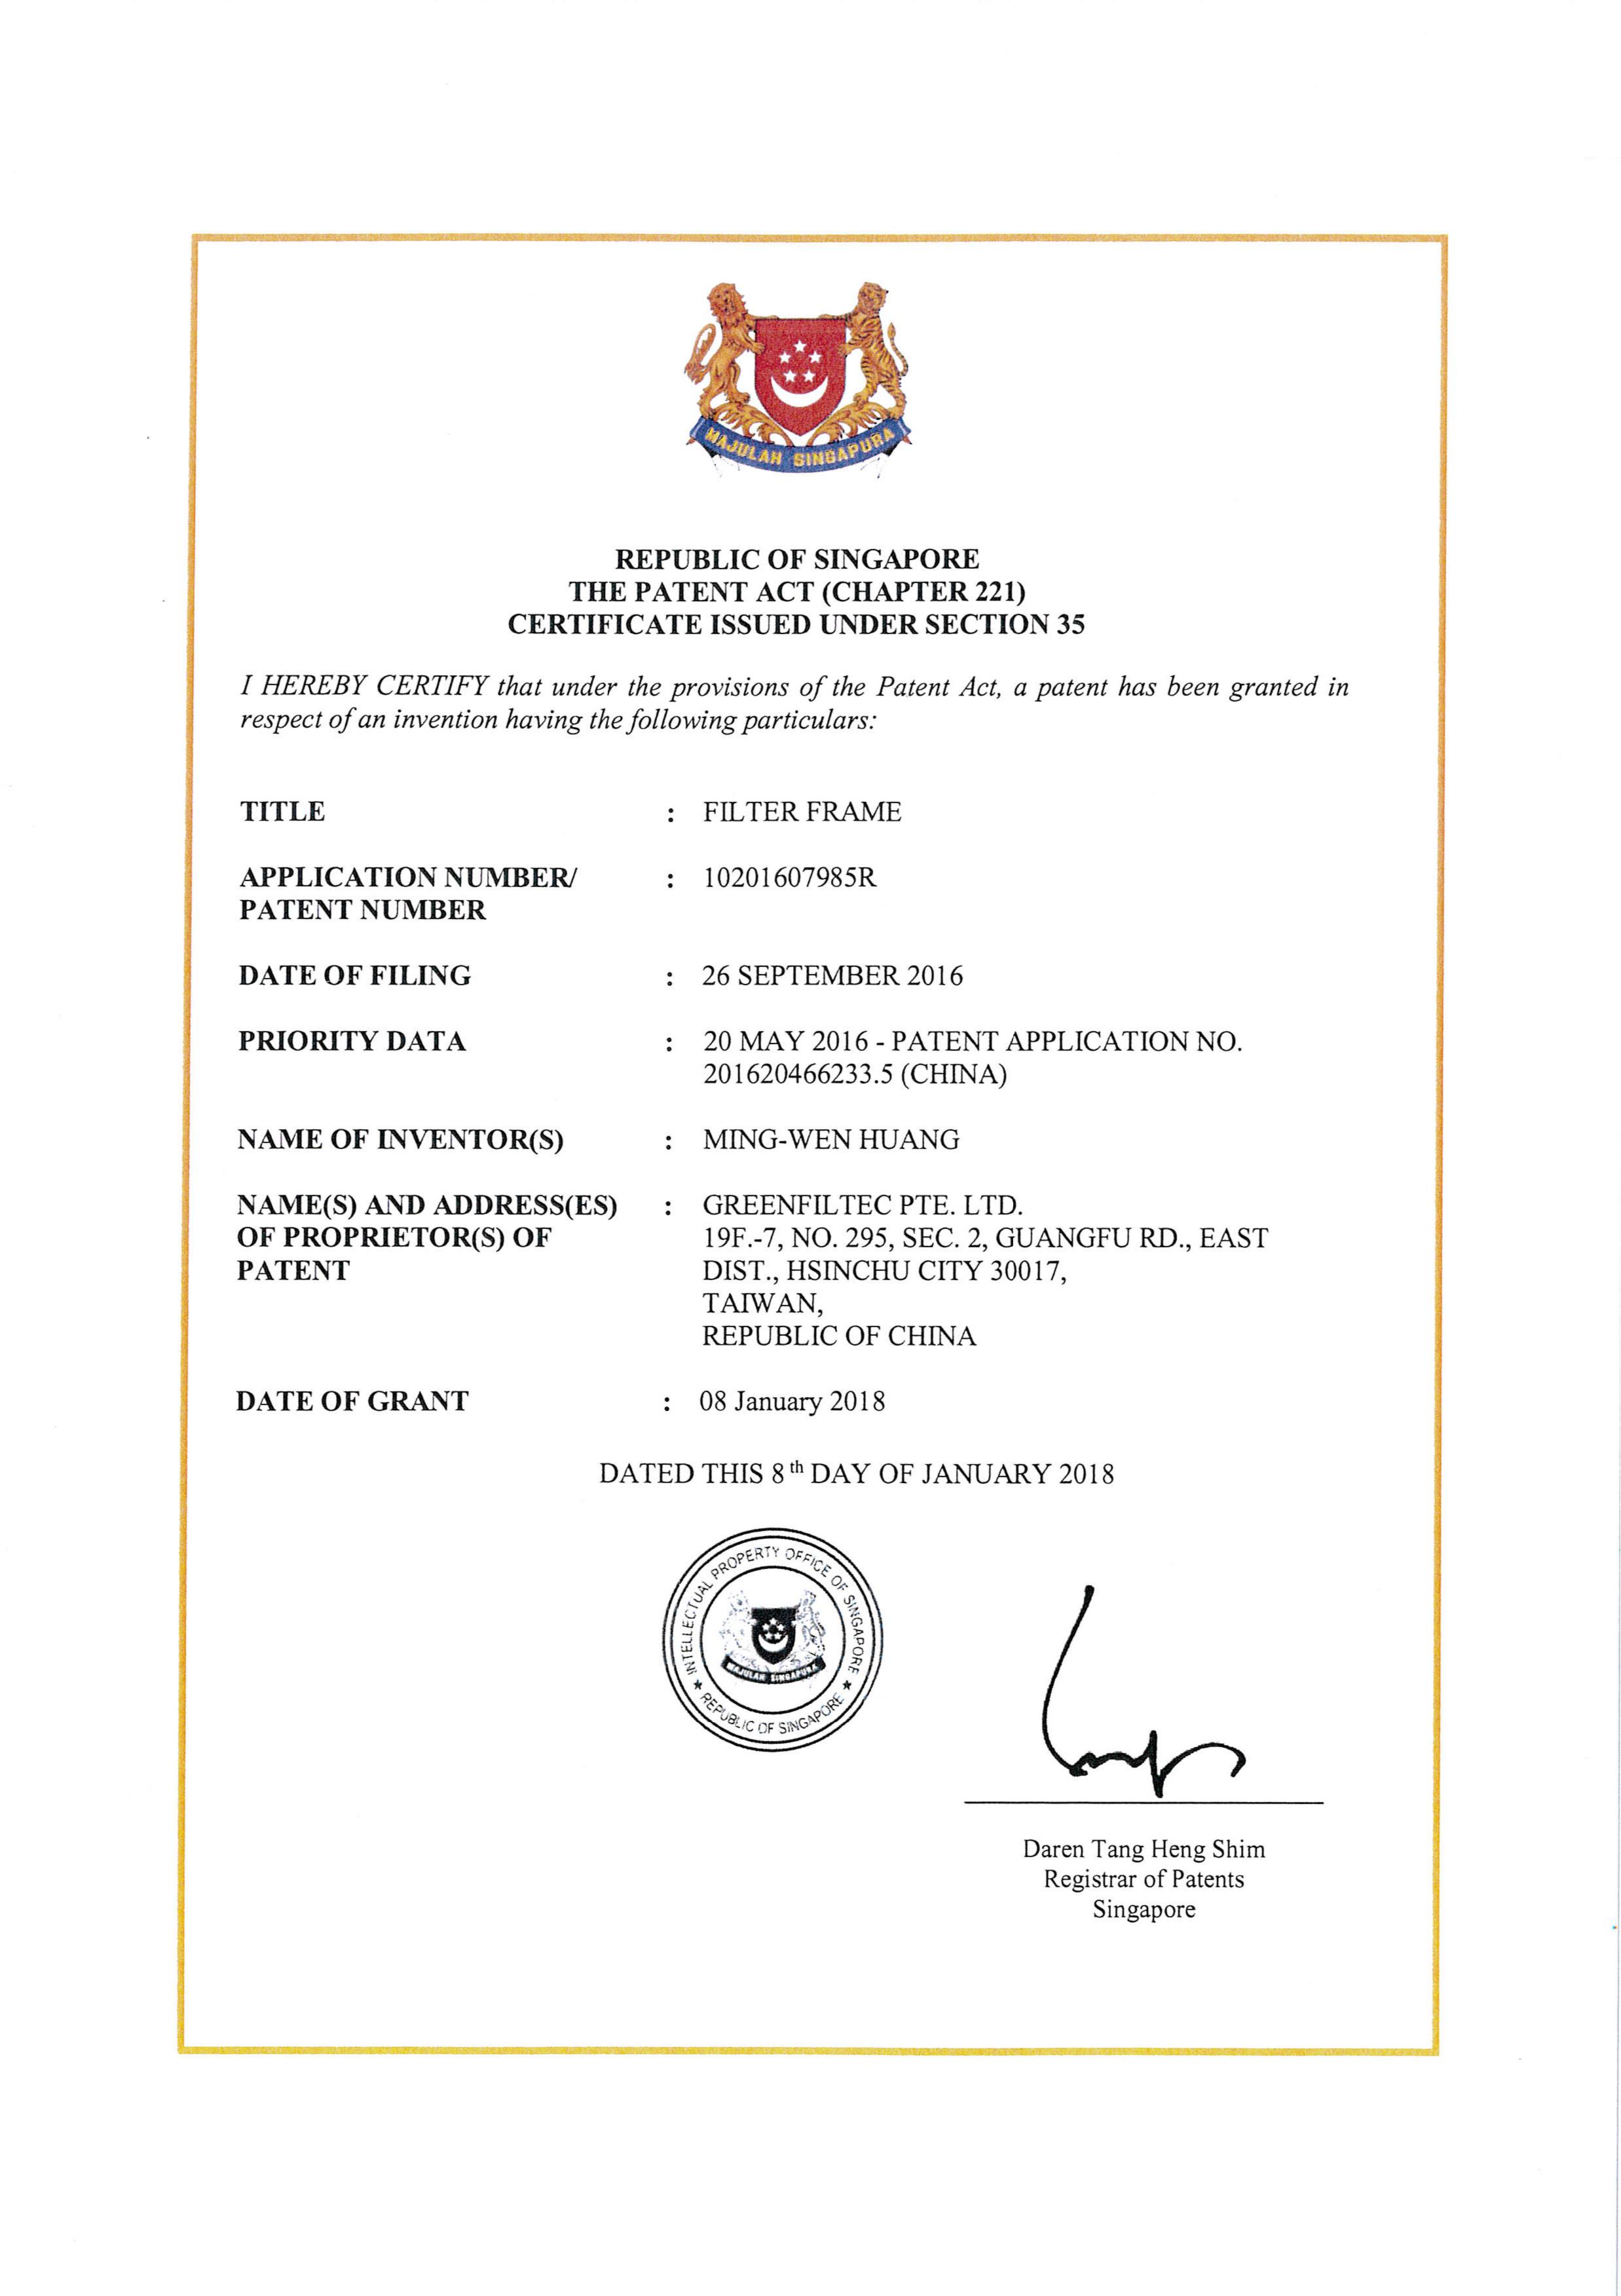 Intellectual Property Office Of Singapore No.10201607985R